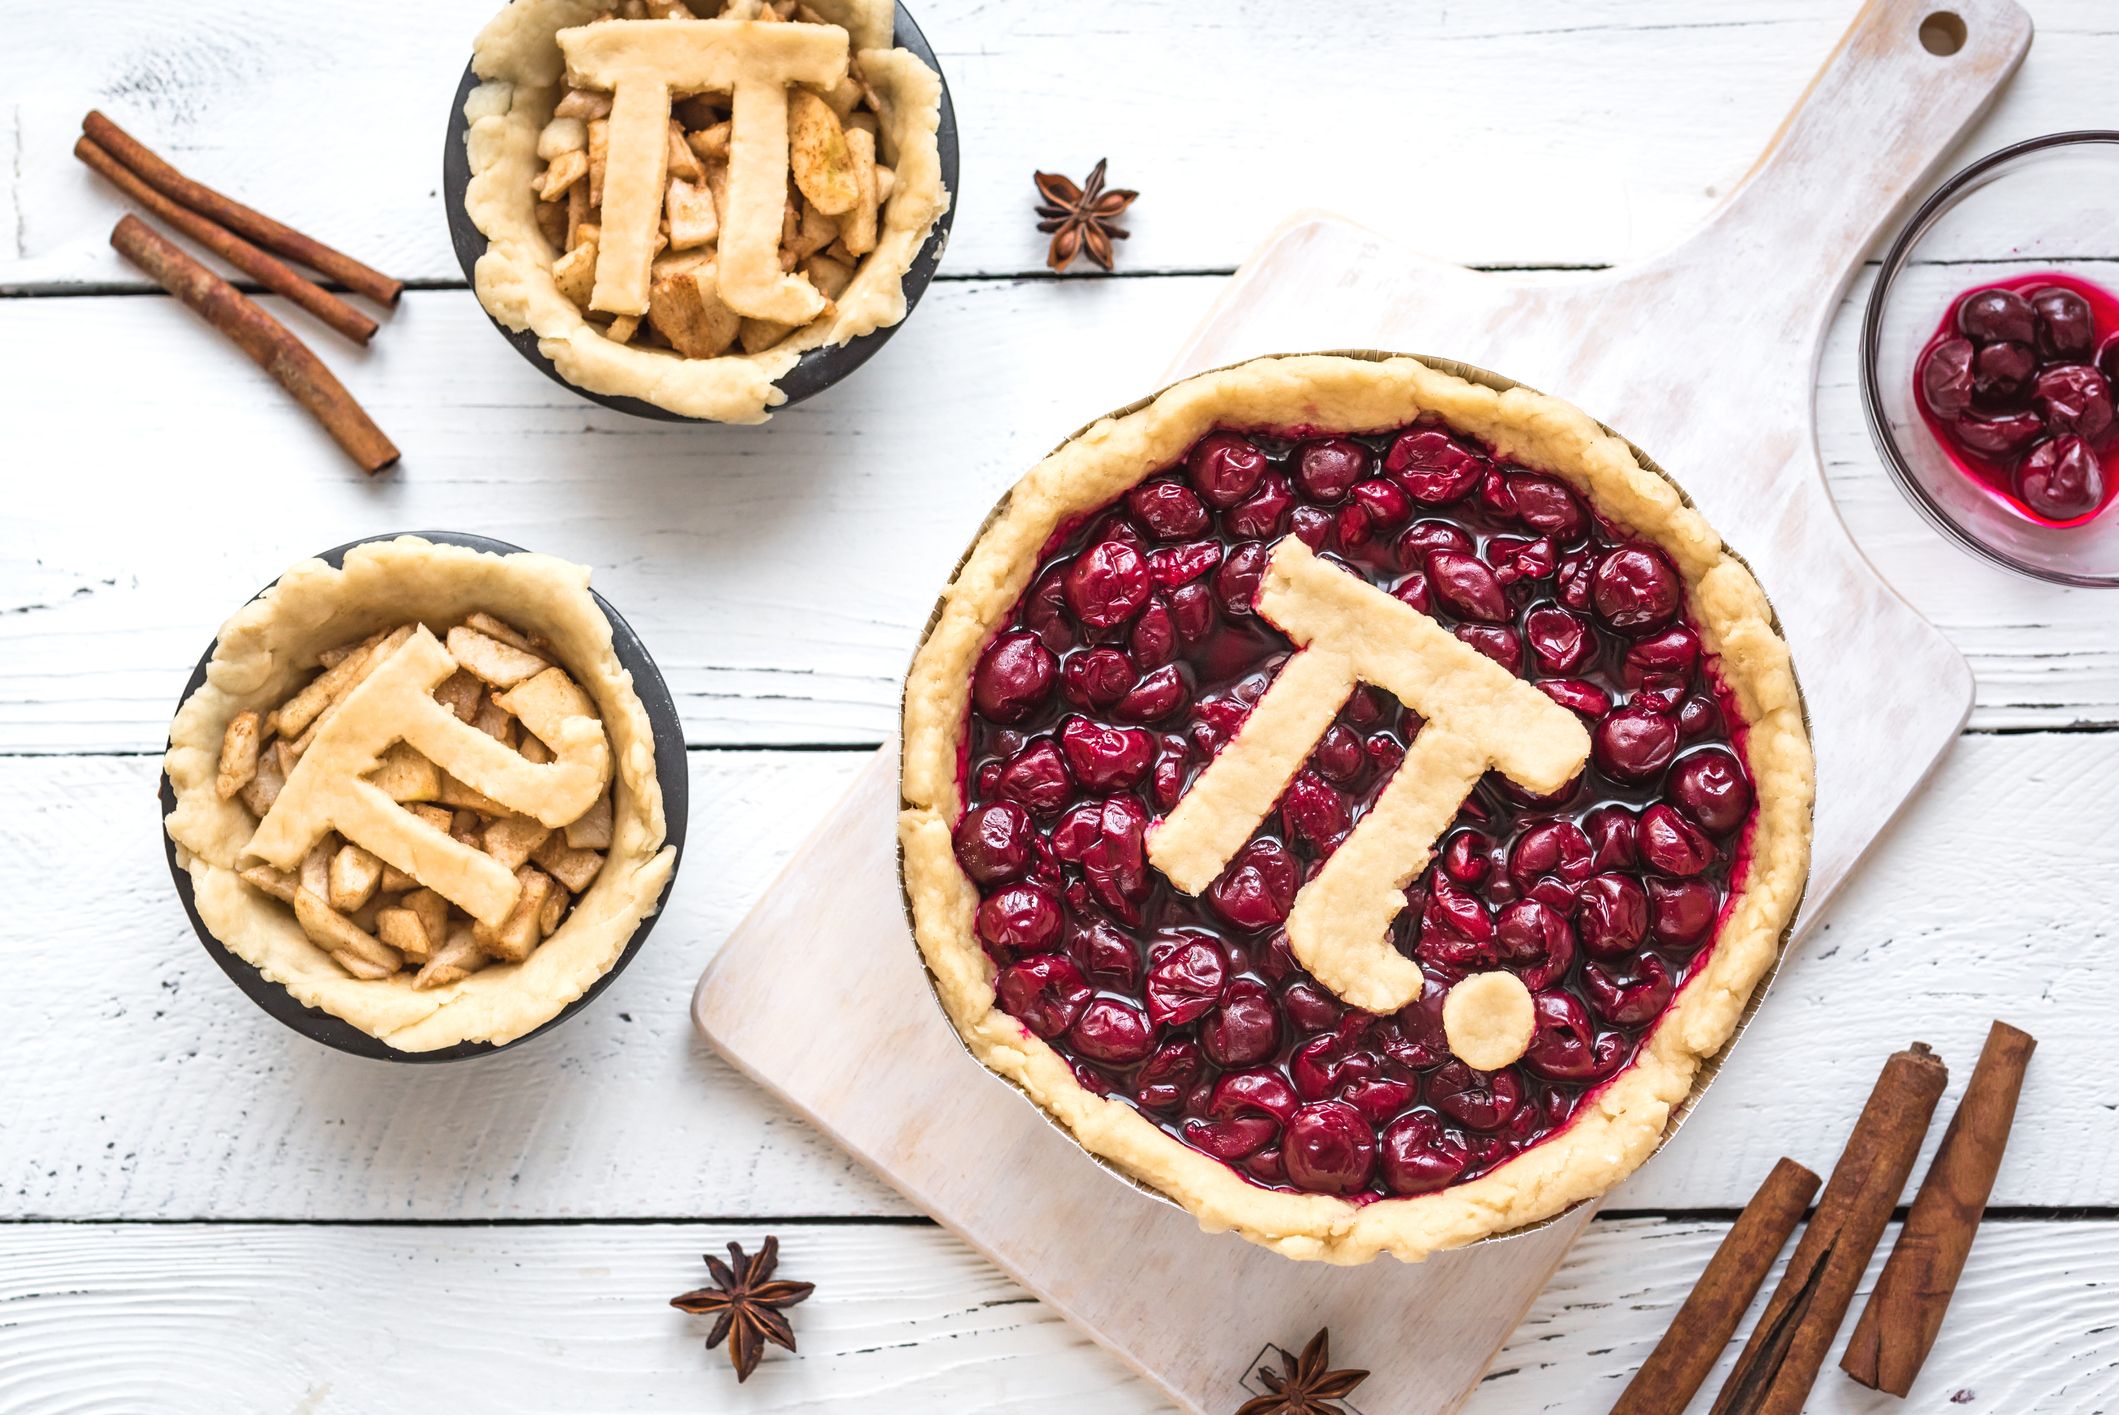 30 Hilarious Pi Day Jokes - Best Math Puns and One-Liners